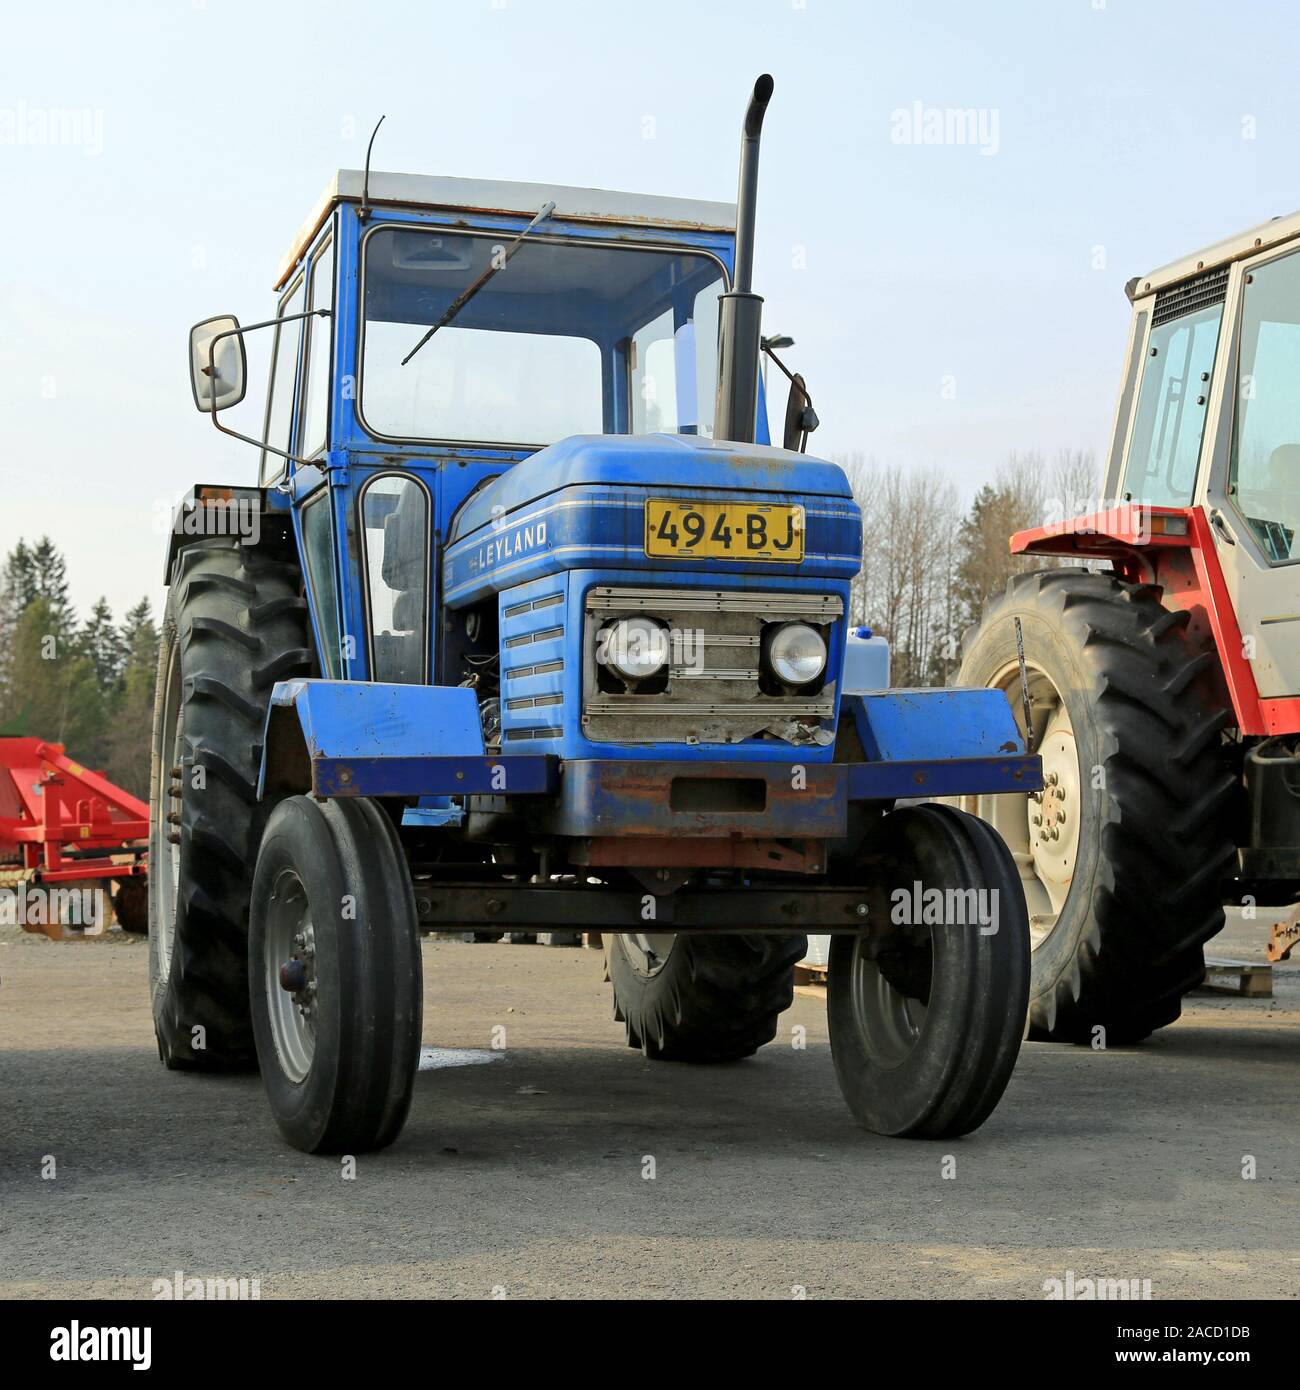 FORSSA, FINLAND - MARCH 1, 2014: Classic Leyland 255 agricultural tractor year 1976 on a yard. The Leyland 255 tractor was built in England by Leyland Stock Photo